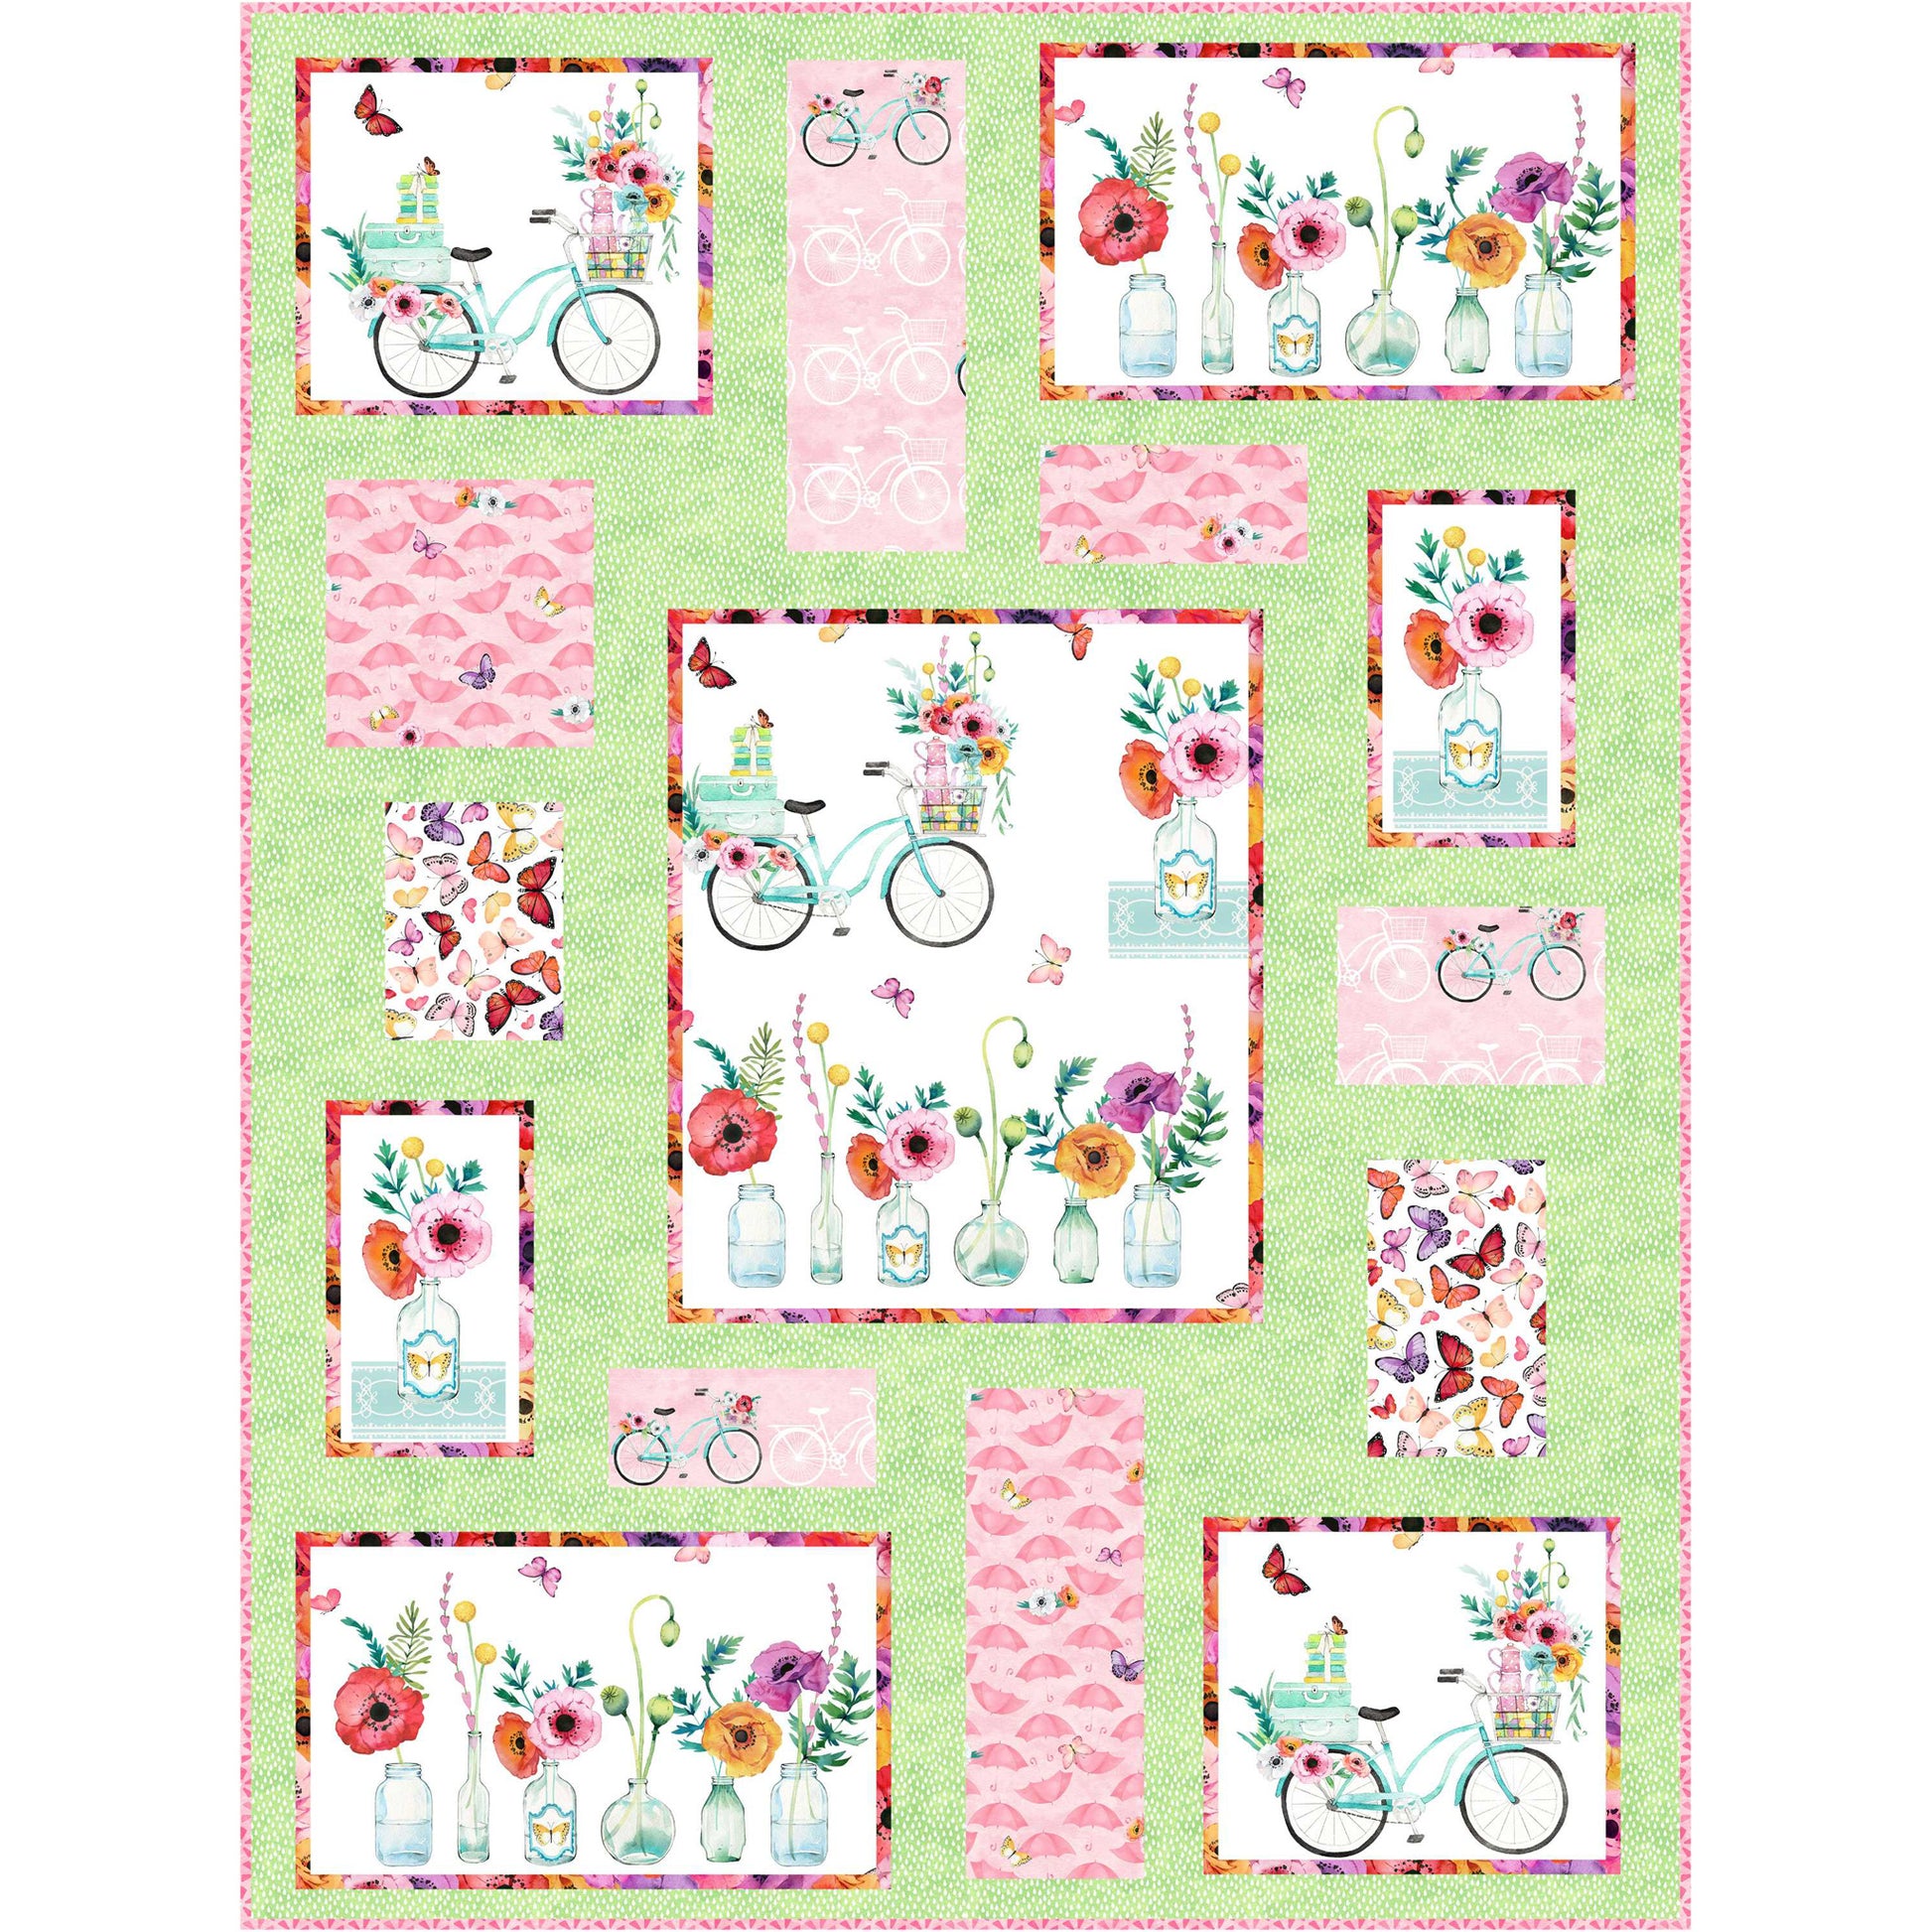 Colorful quilt with flowers and bicycles in pretty pinks and green with a green background.